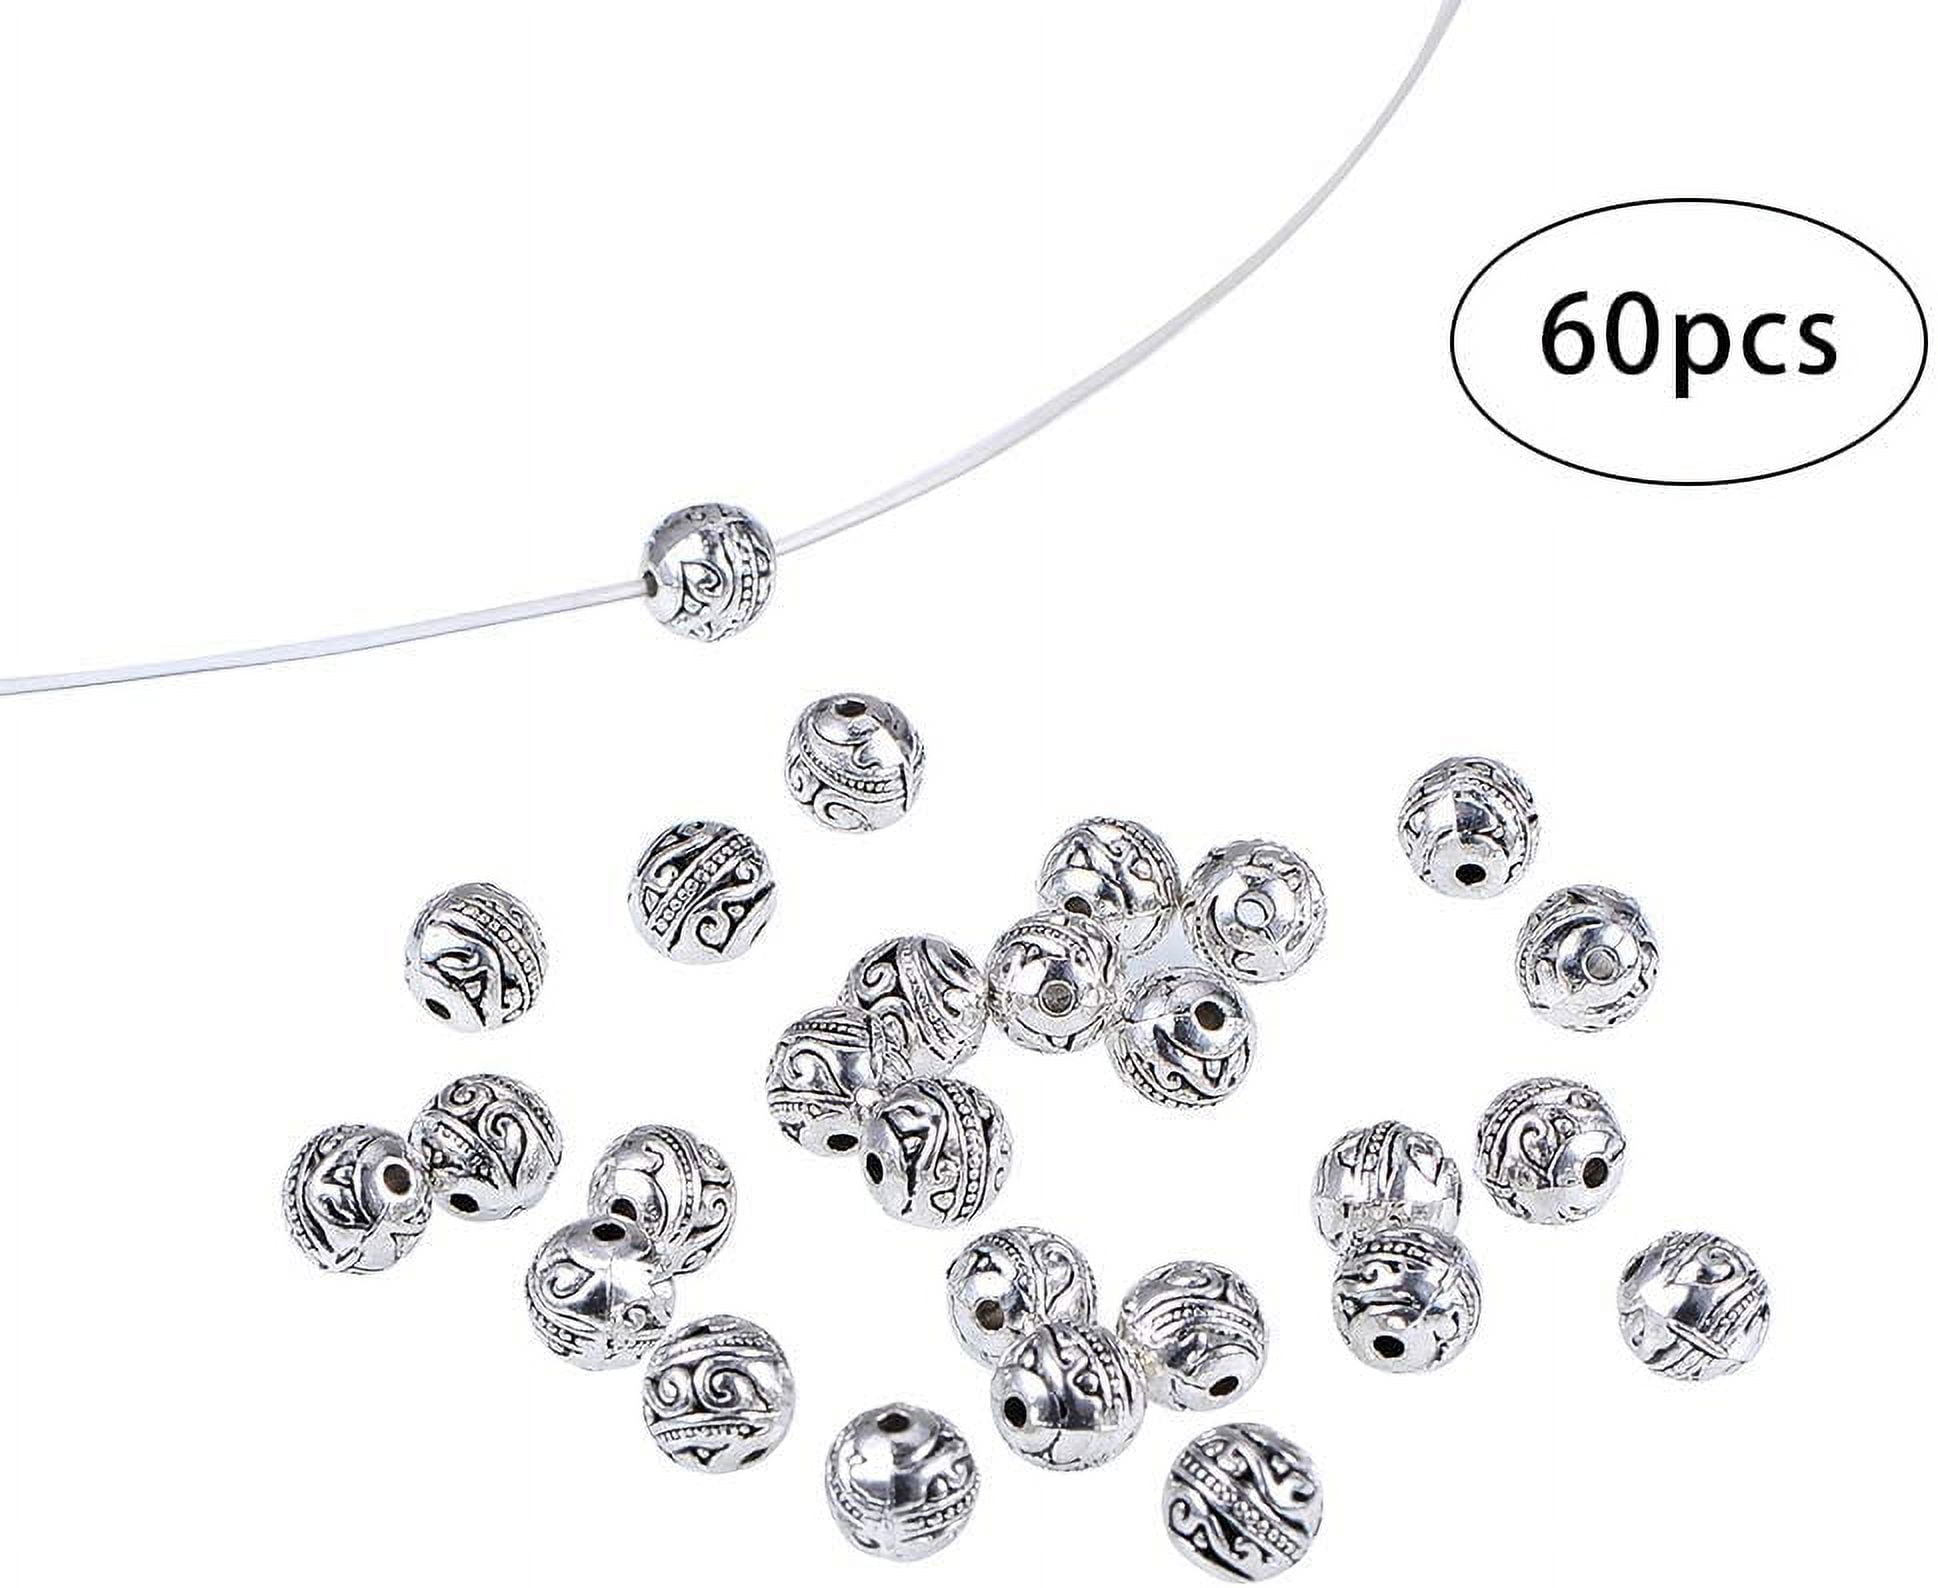 20pcs Vintage Style 9mm Hollow Round Large Hole Beads Antique Silvery  Spacer Beads For DIY Handmade Beaded Bracelet Necklace Crafts Jewelry  Making Sup